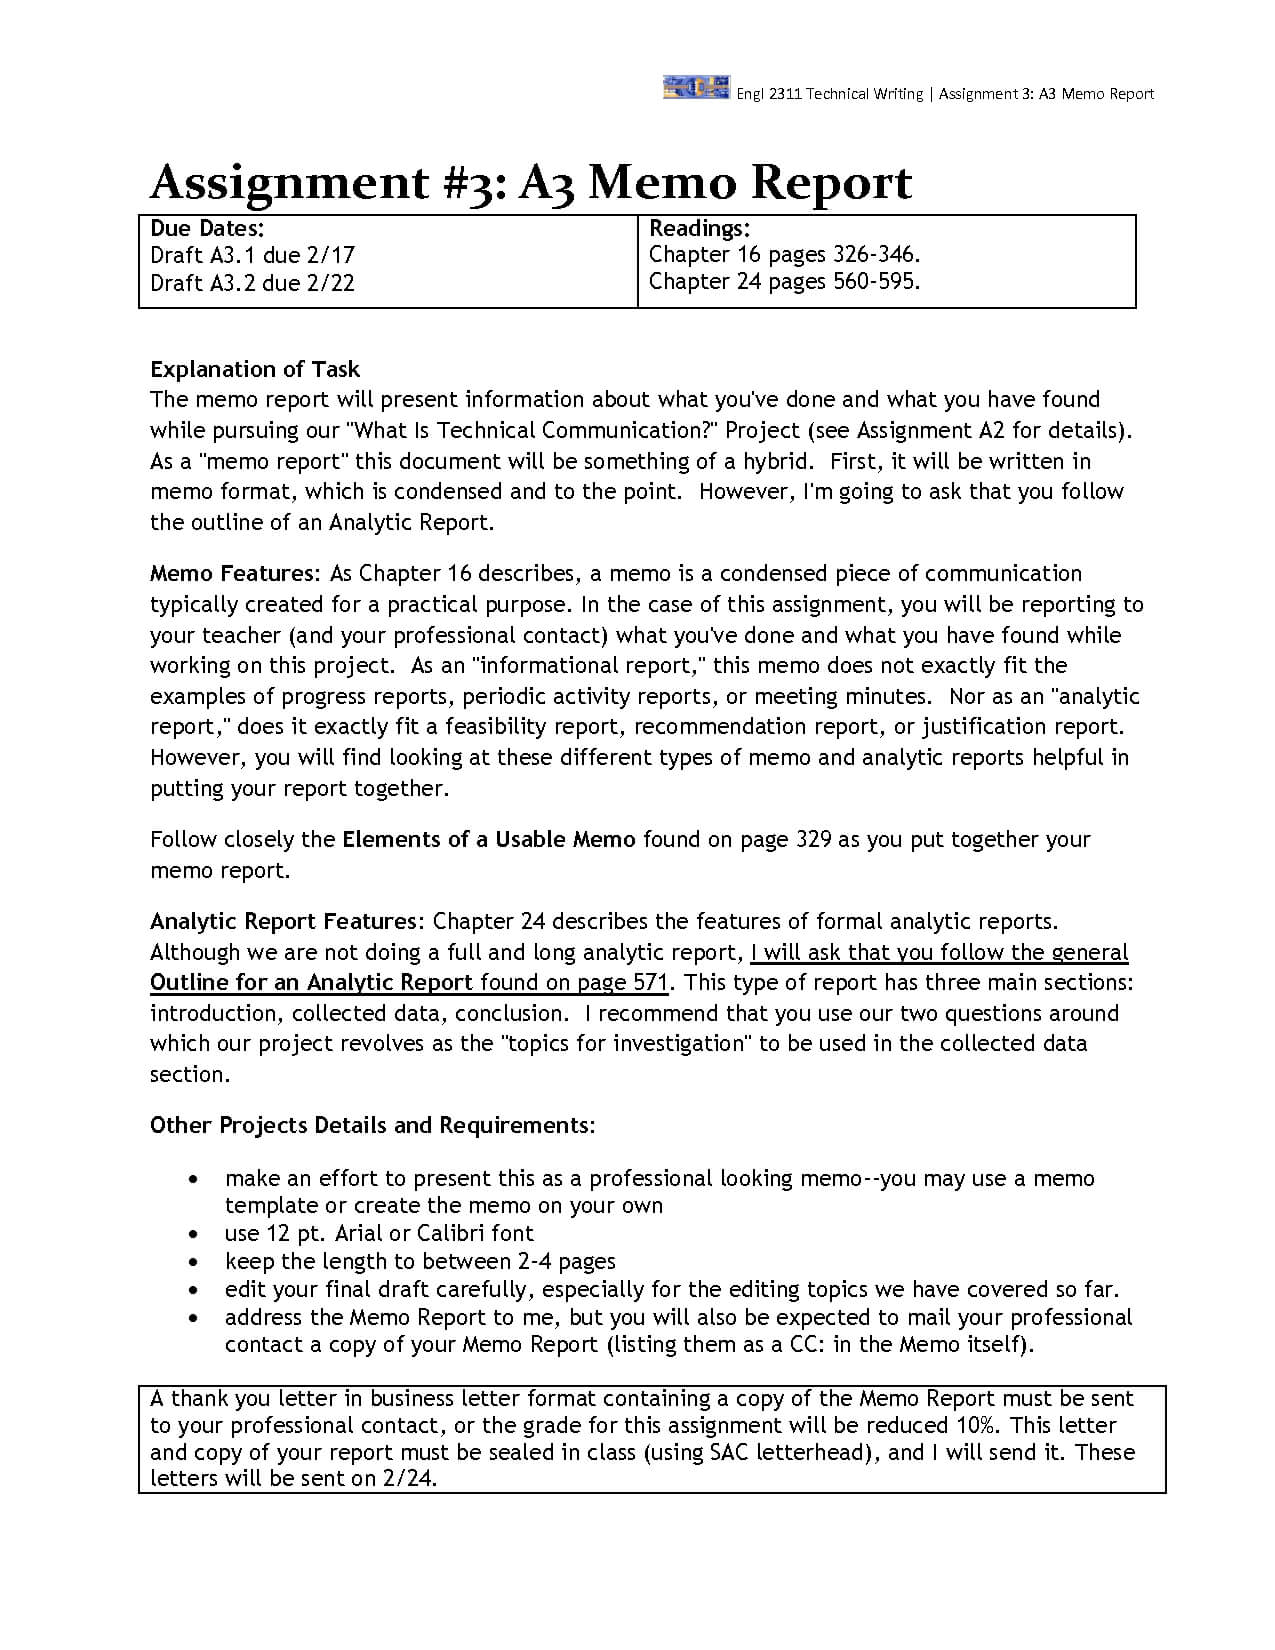 Recommendation Report E Examples Tender Google Docs Intended For Recommendation Report Template